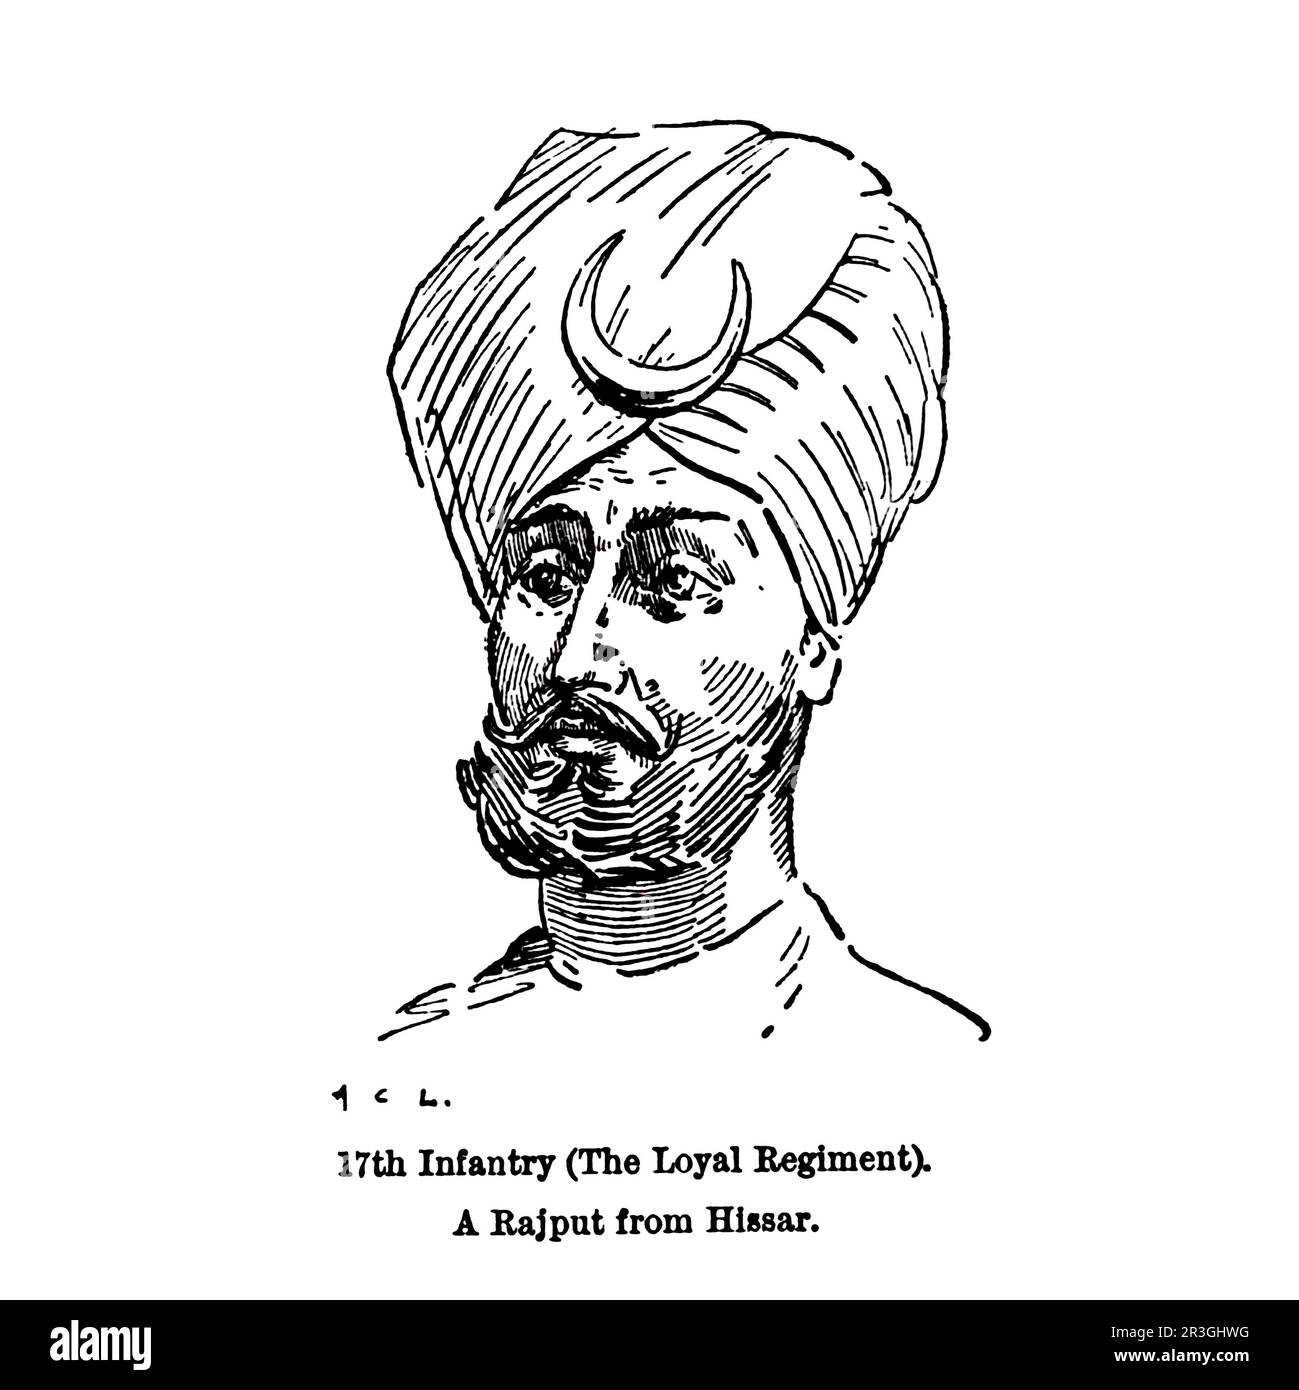 17th Infantry (The Loyal Regiment). A Rajput from Hissar Sketch by Major Alfred Crowdy Lovett, (1862-1919) from the book ' The armies of India ' by Major George Fletcher MacMunn, (1869-1952) Publication date 1911 Publisher London, Adam and Charles Black Stock Photo